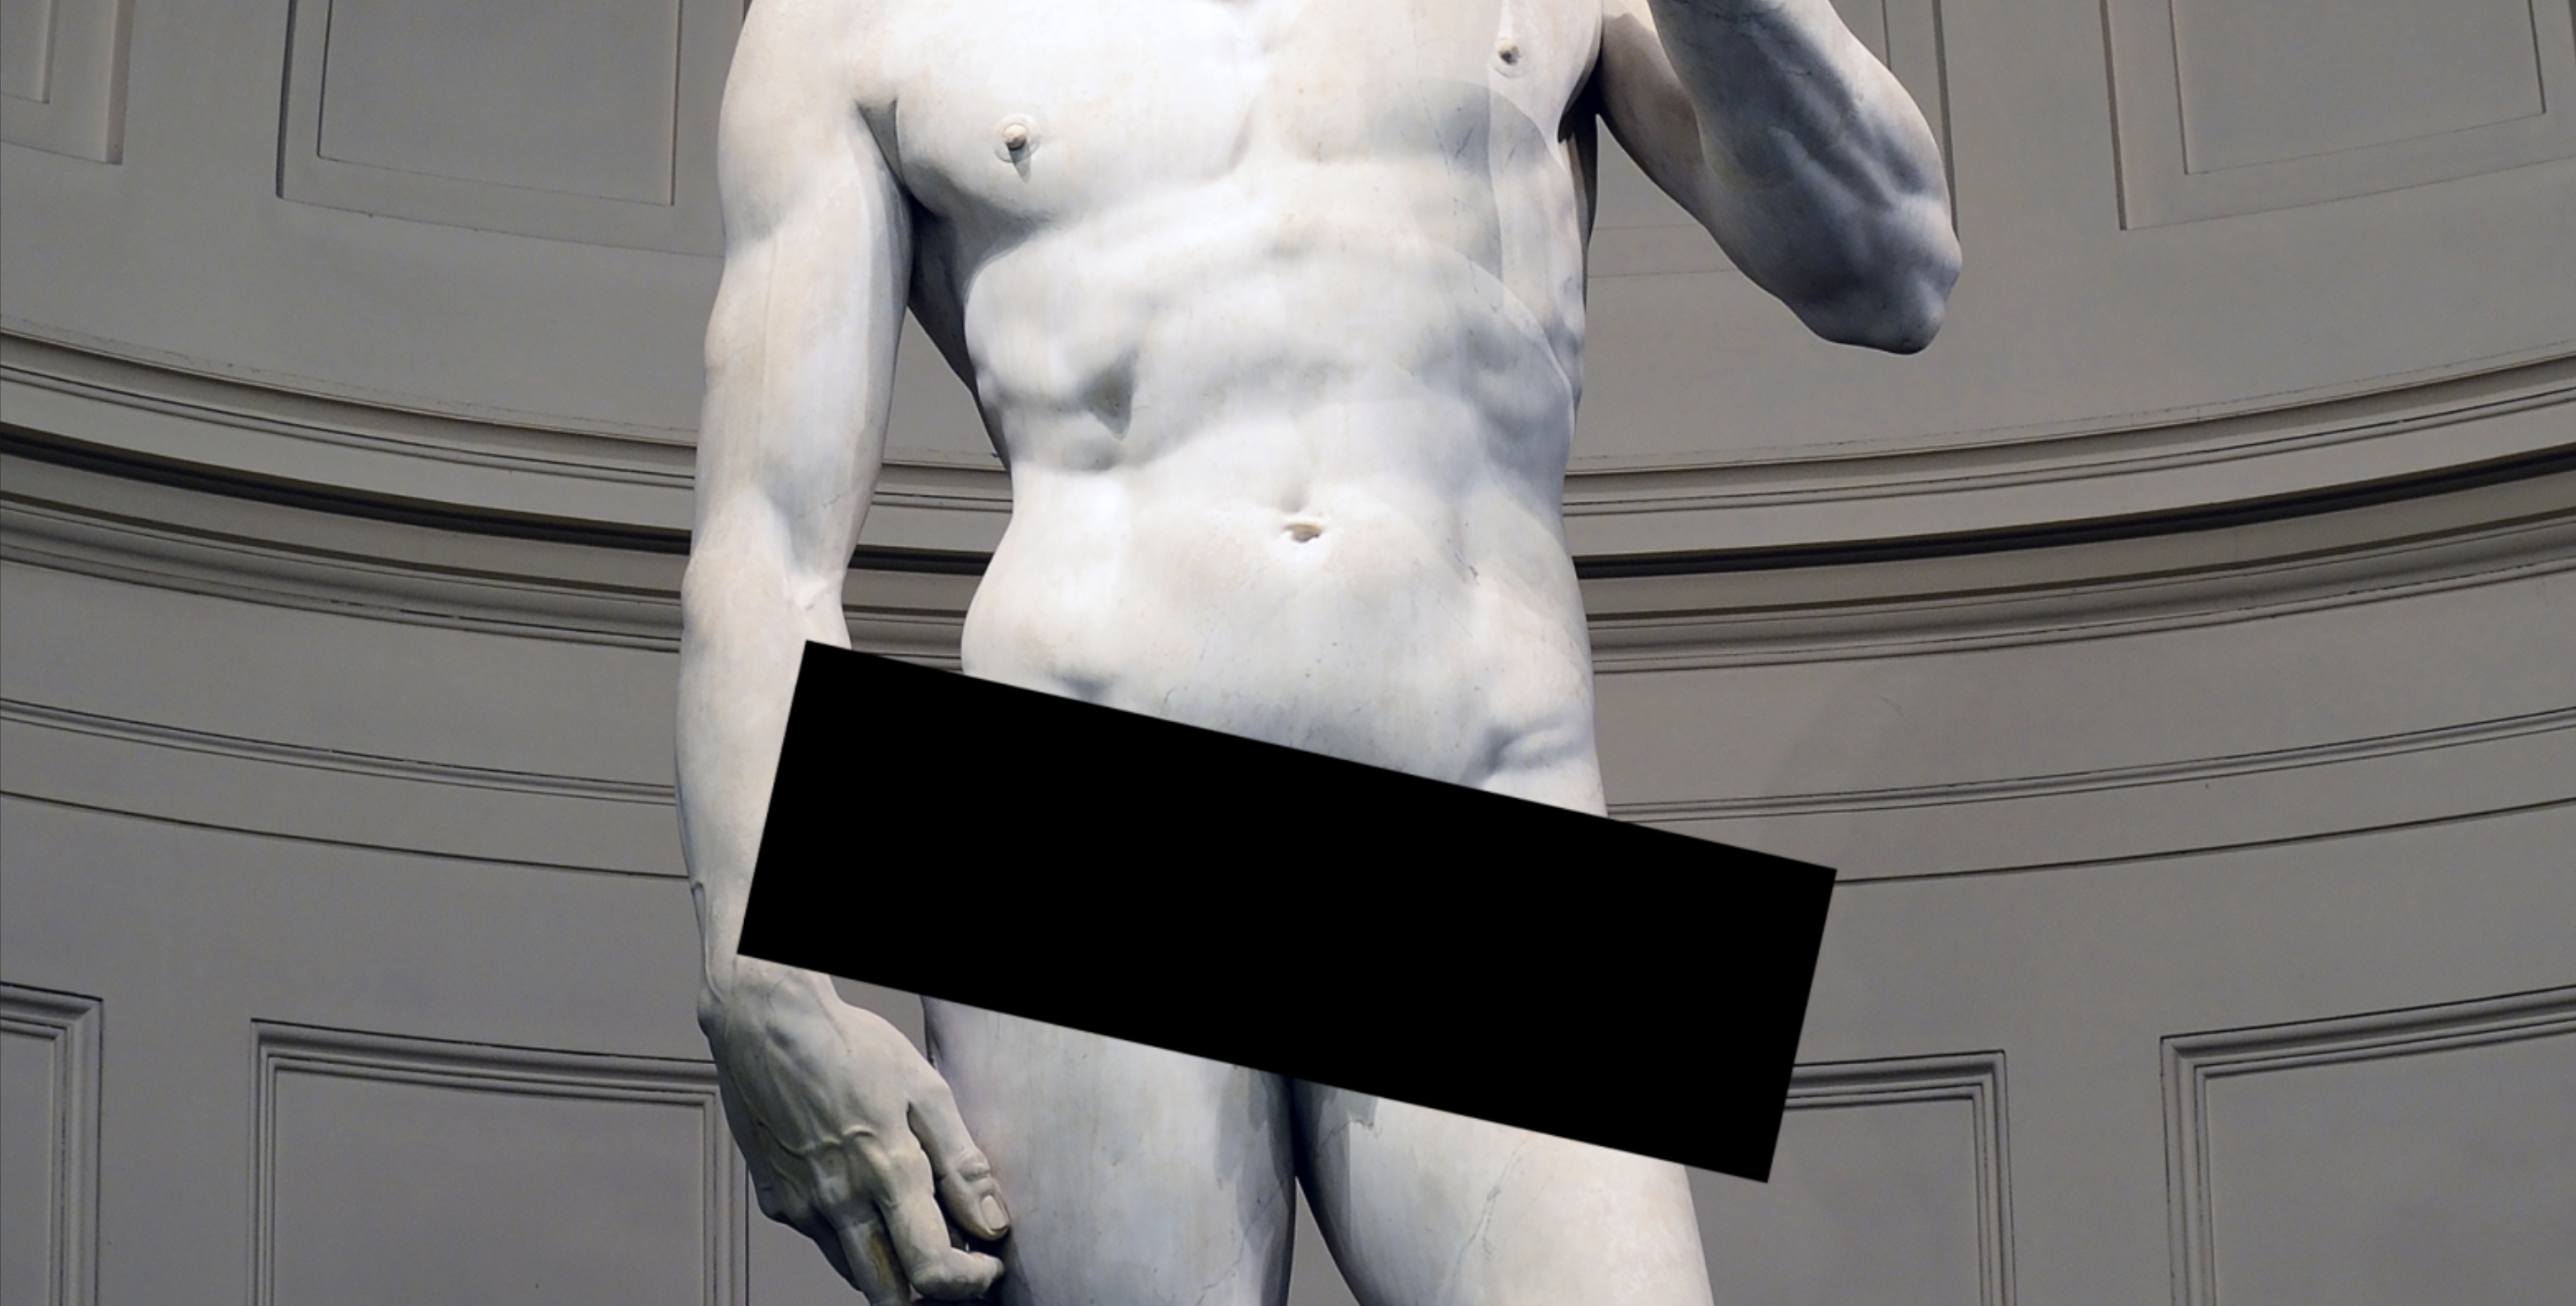 Photo of the stone Statue of David's torso with a censor bar over his hips